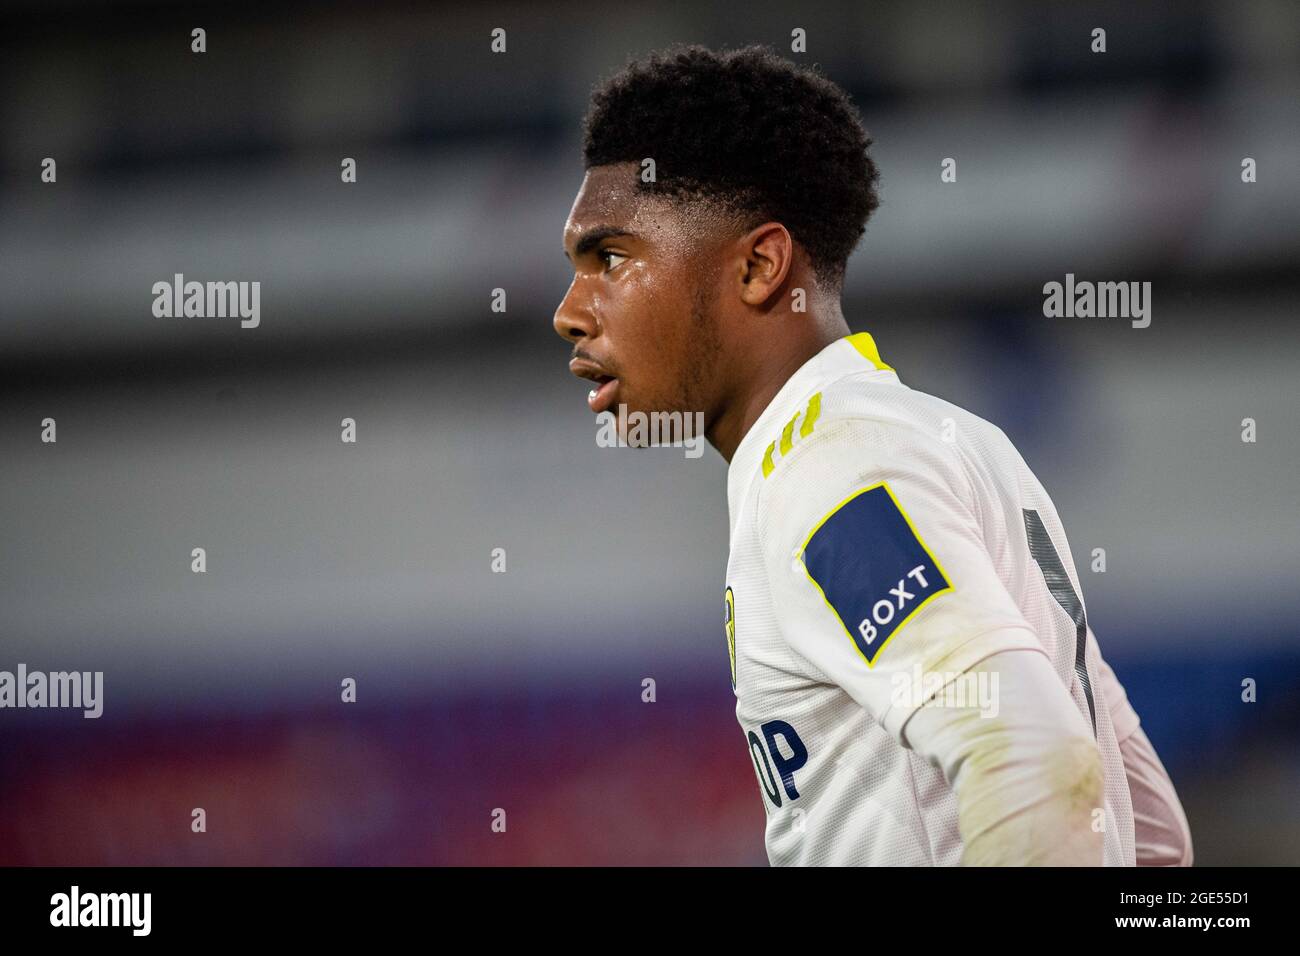 Premier League 2 Division 1 match between Crystal Palace and Leeds on  August 16, 2021 in London, England Stock Photo - Alamy